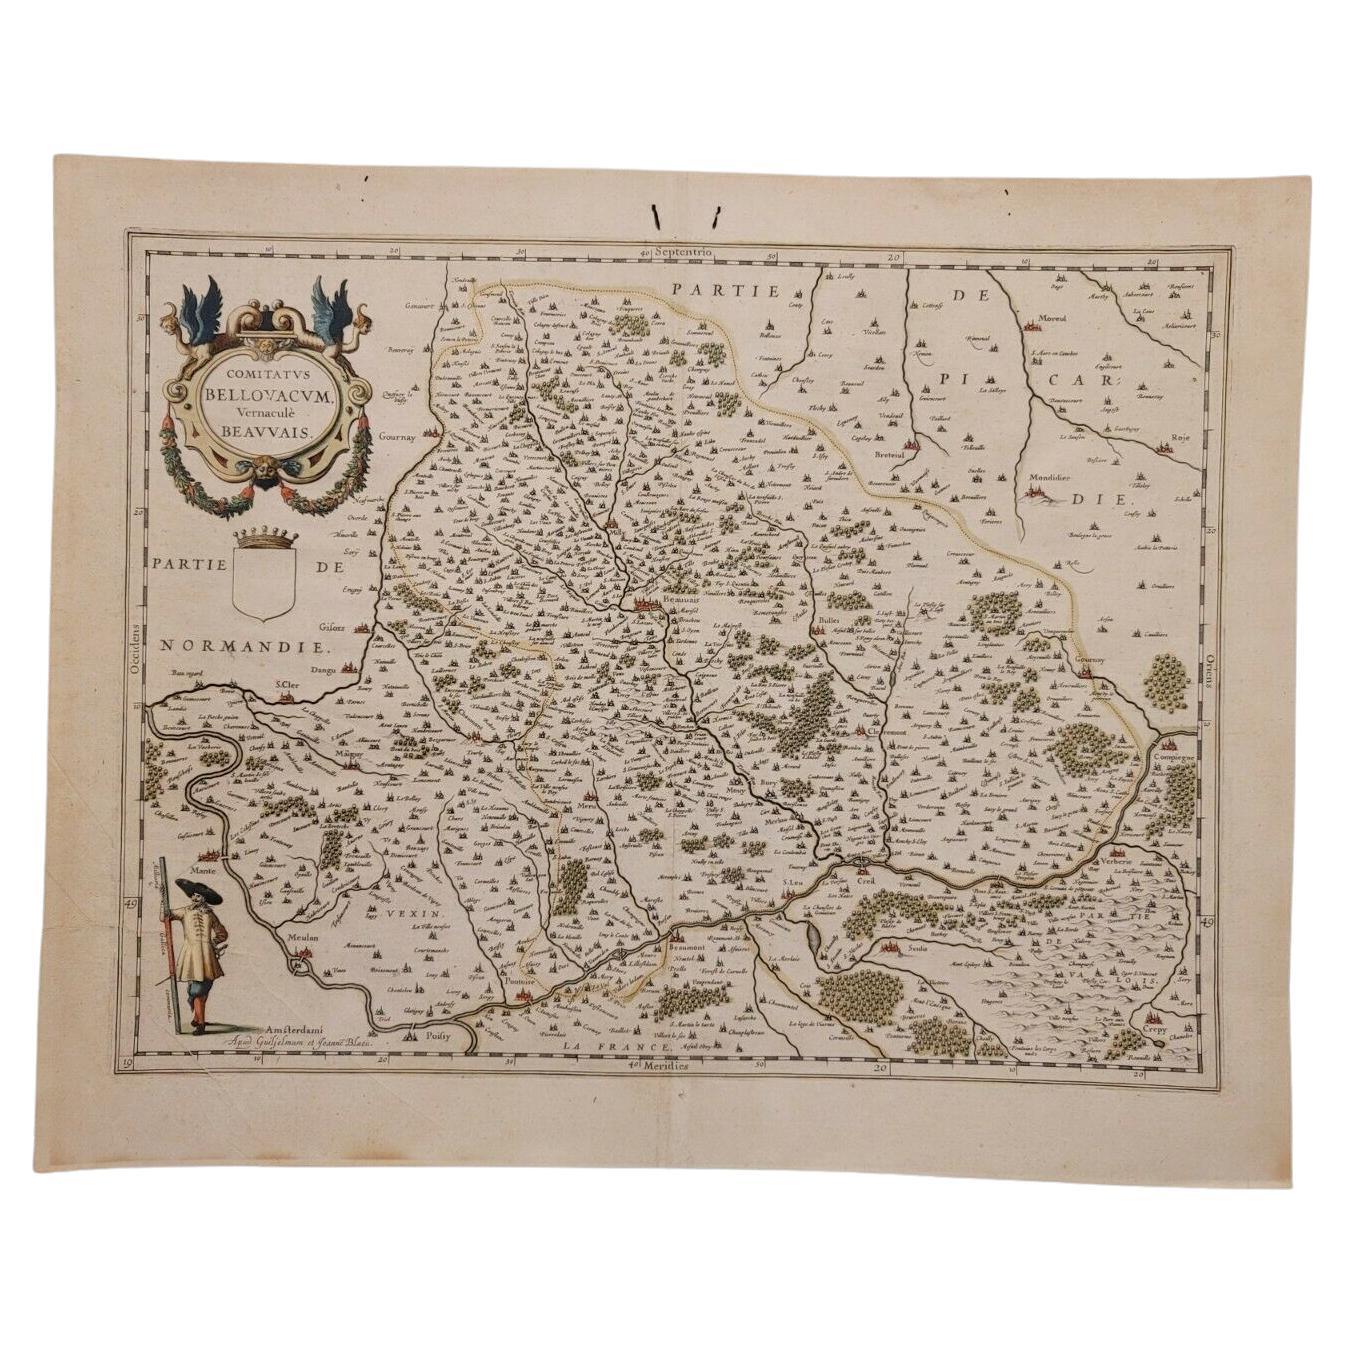 1635 Willem Blaeu Map of Northern France"Comitatvs Bellovacvm" Ric.a08 For Sale